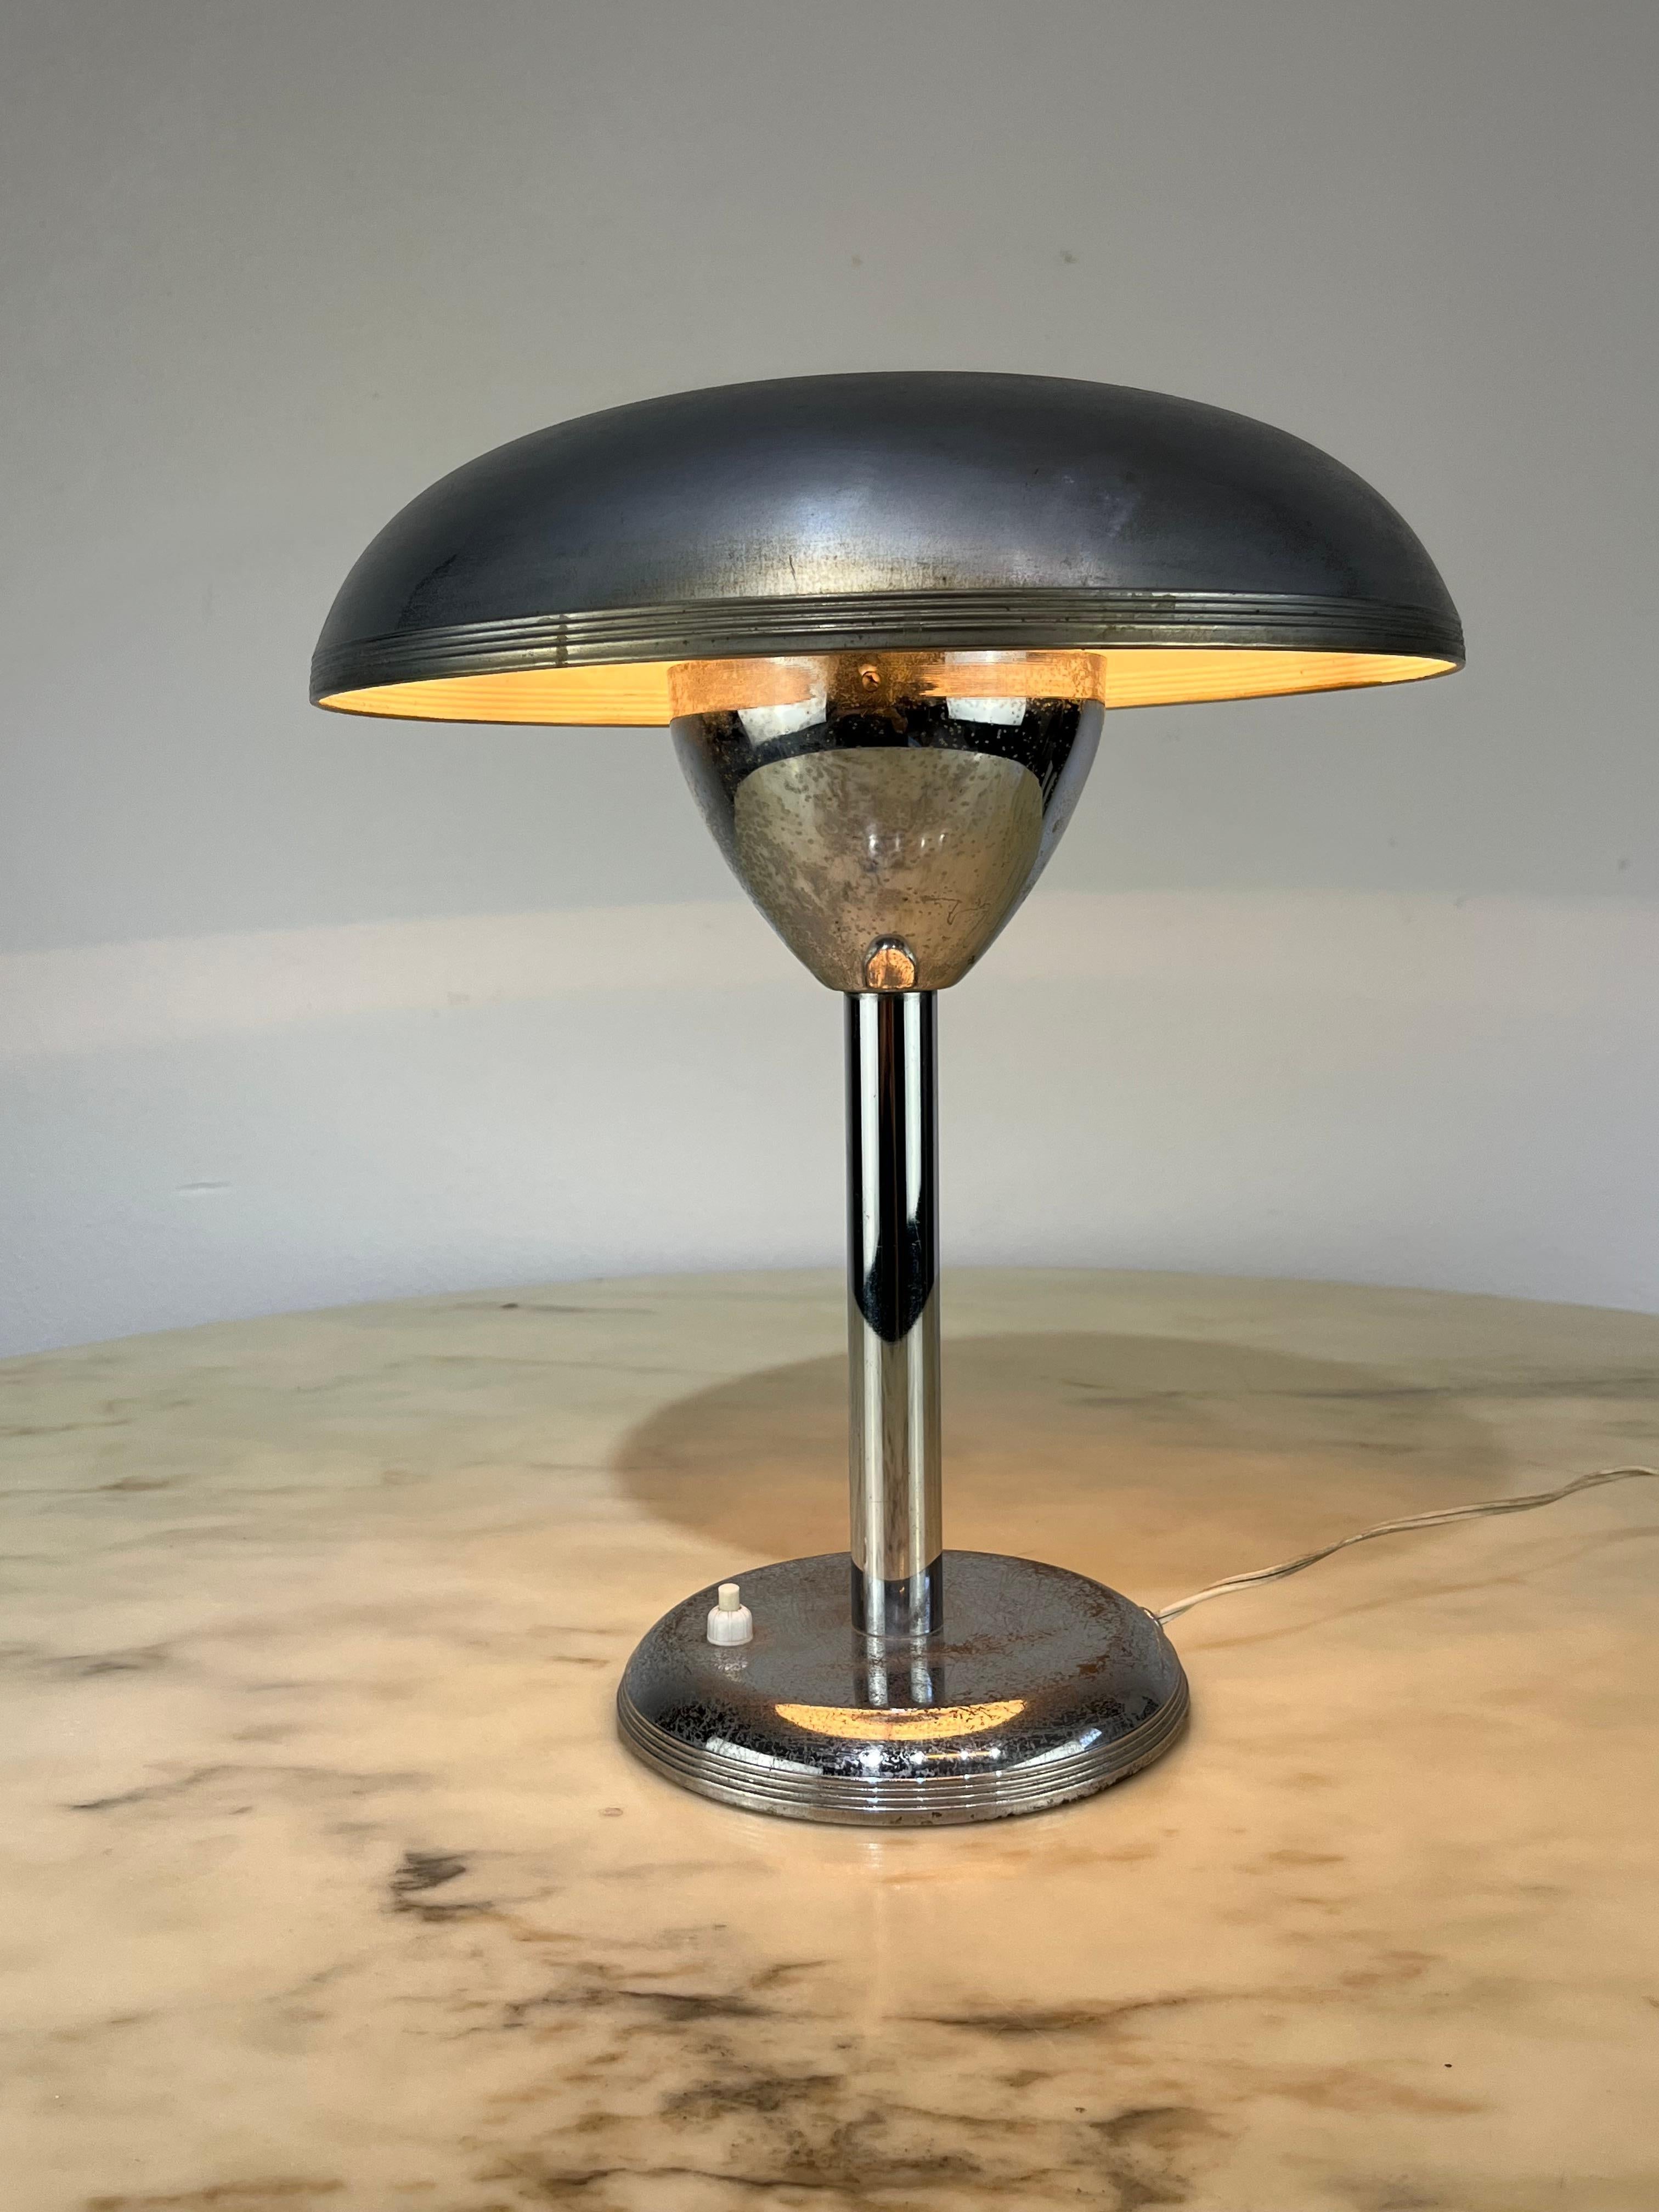 Table lamp from the 1930s. Bahaus style, 36 cm high, 28 cm diameter. It shows signs of aging and oxidation but is fully functional.

The Bauhaus, whose full name was Staatliches Bauhaus, was an art and design school that operated in Germany from